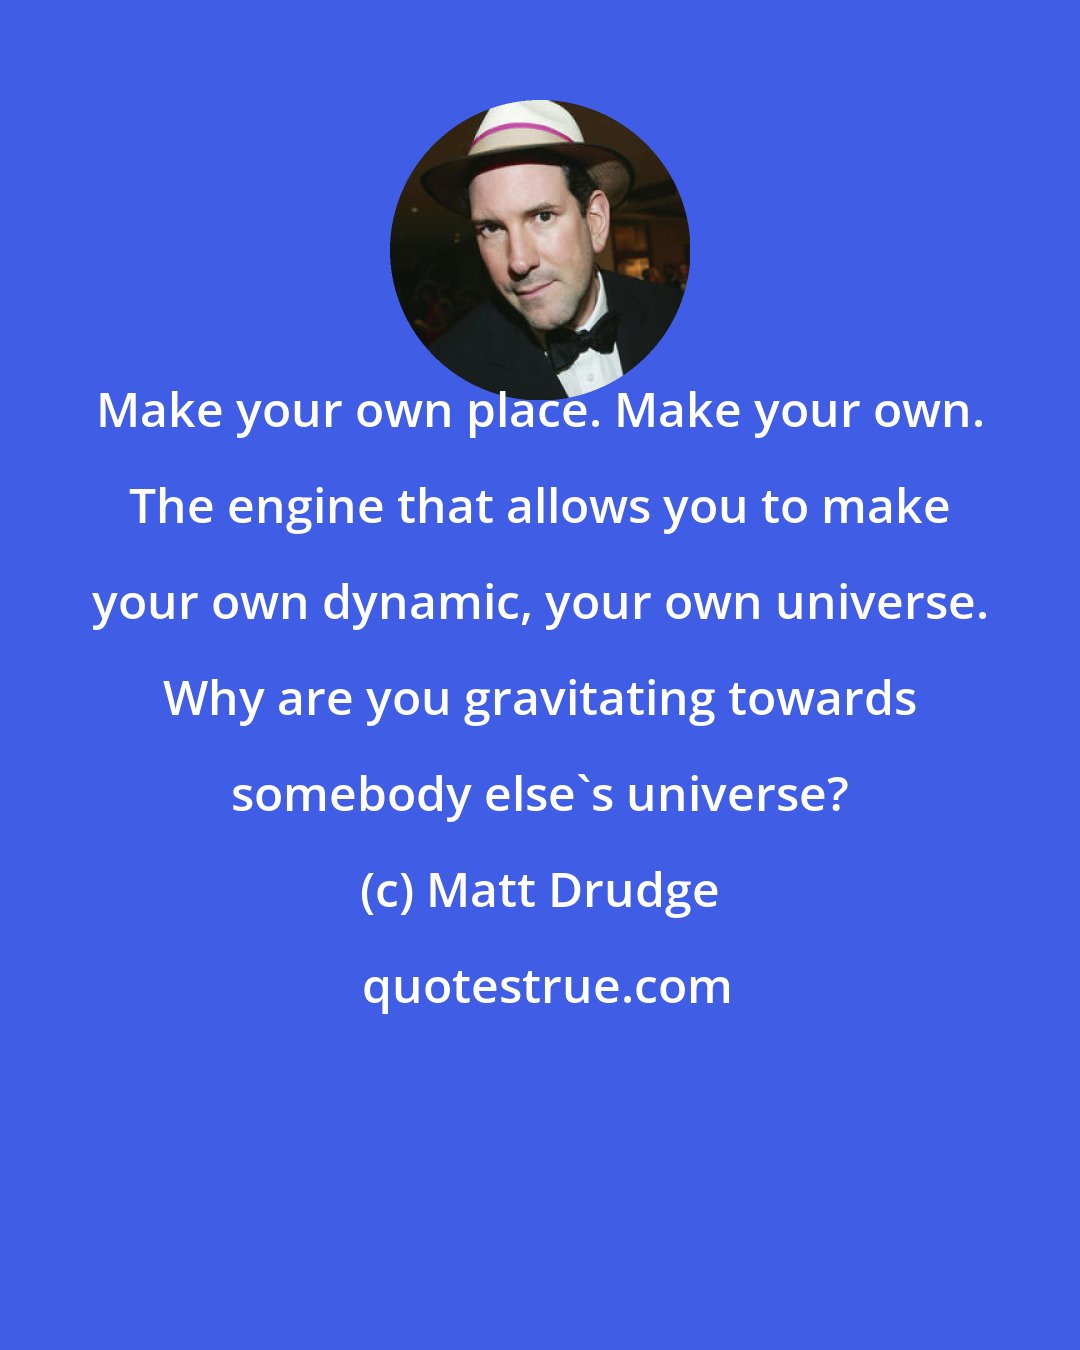 Matt Drudge: Make your own place. Make your own. The engine that allows you to make your own dynamic, your own universe. Why are you gravitating towards somebody else's universe?